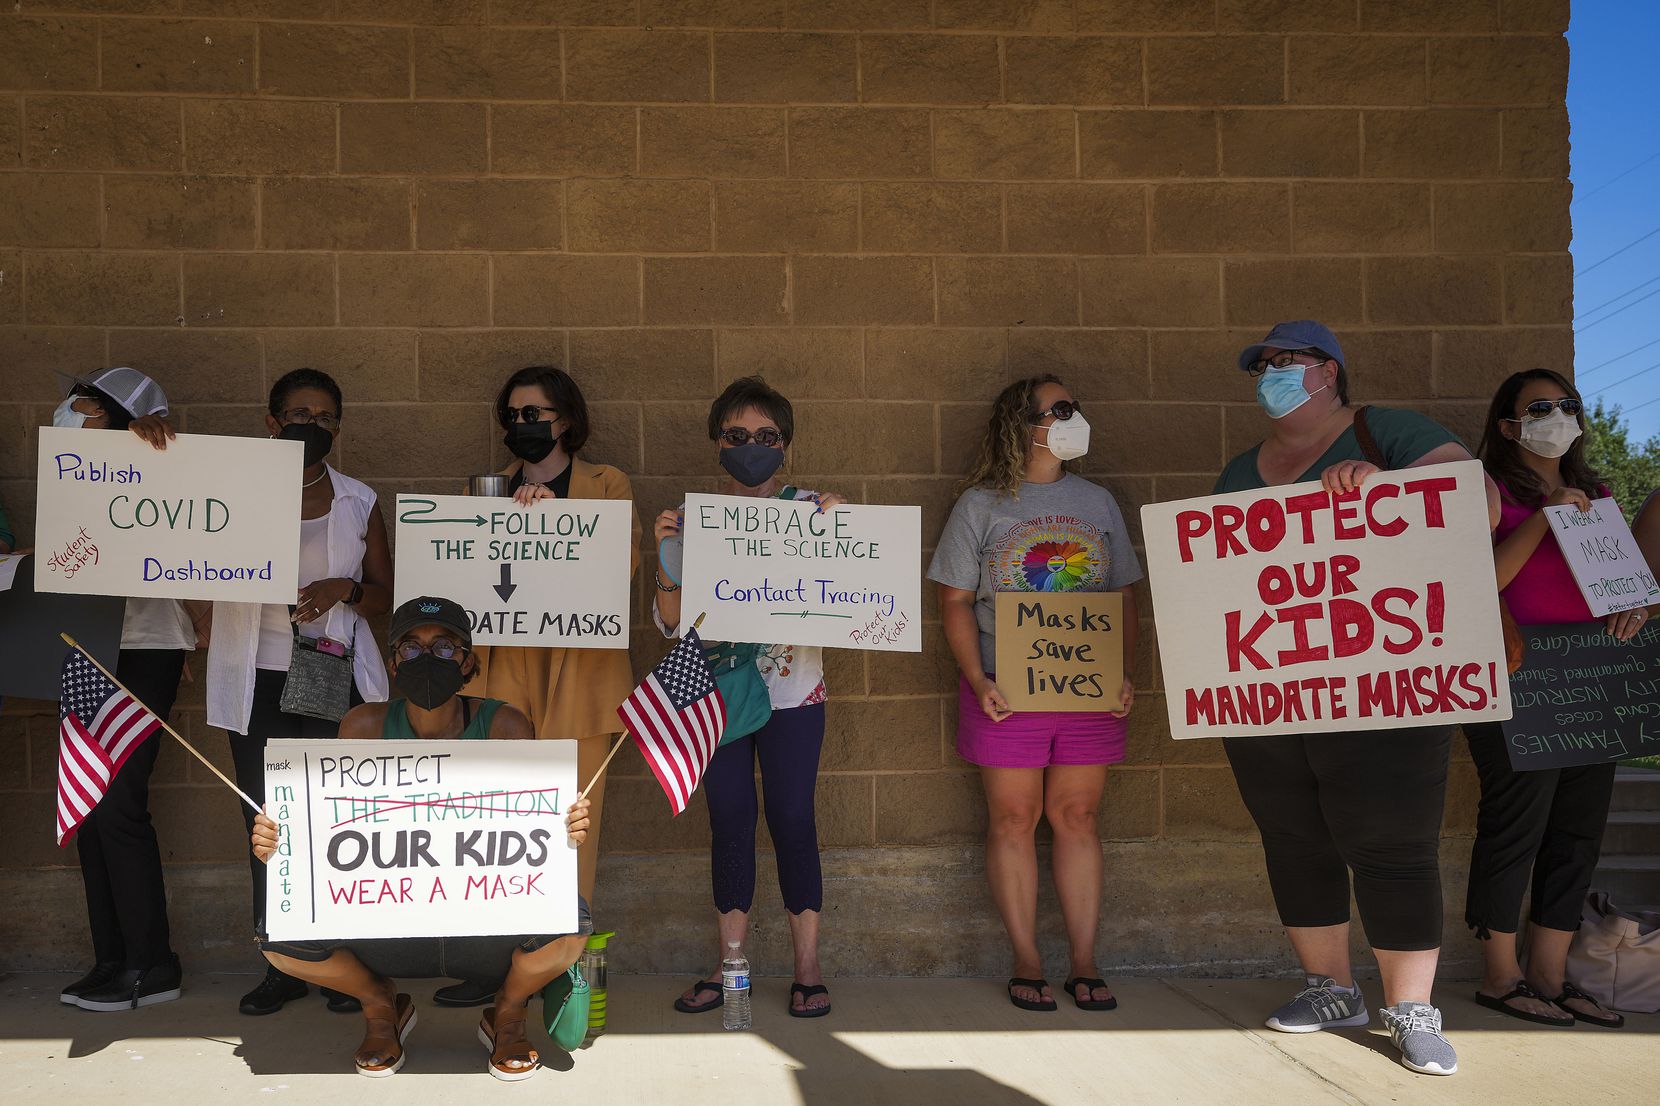 Supporters of mask mandates line up waiting to enter the Carroll ISD school board meeting on Monday, Aug. 23, 2021, in Southlake, Texas. (Smiley N. Pool/The Dallas Morning News)